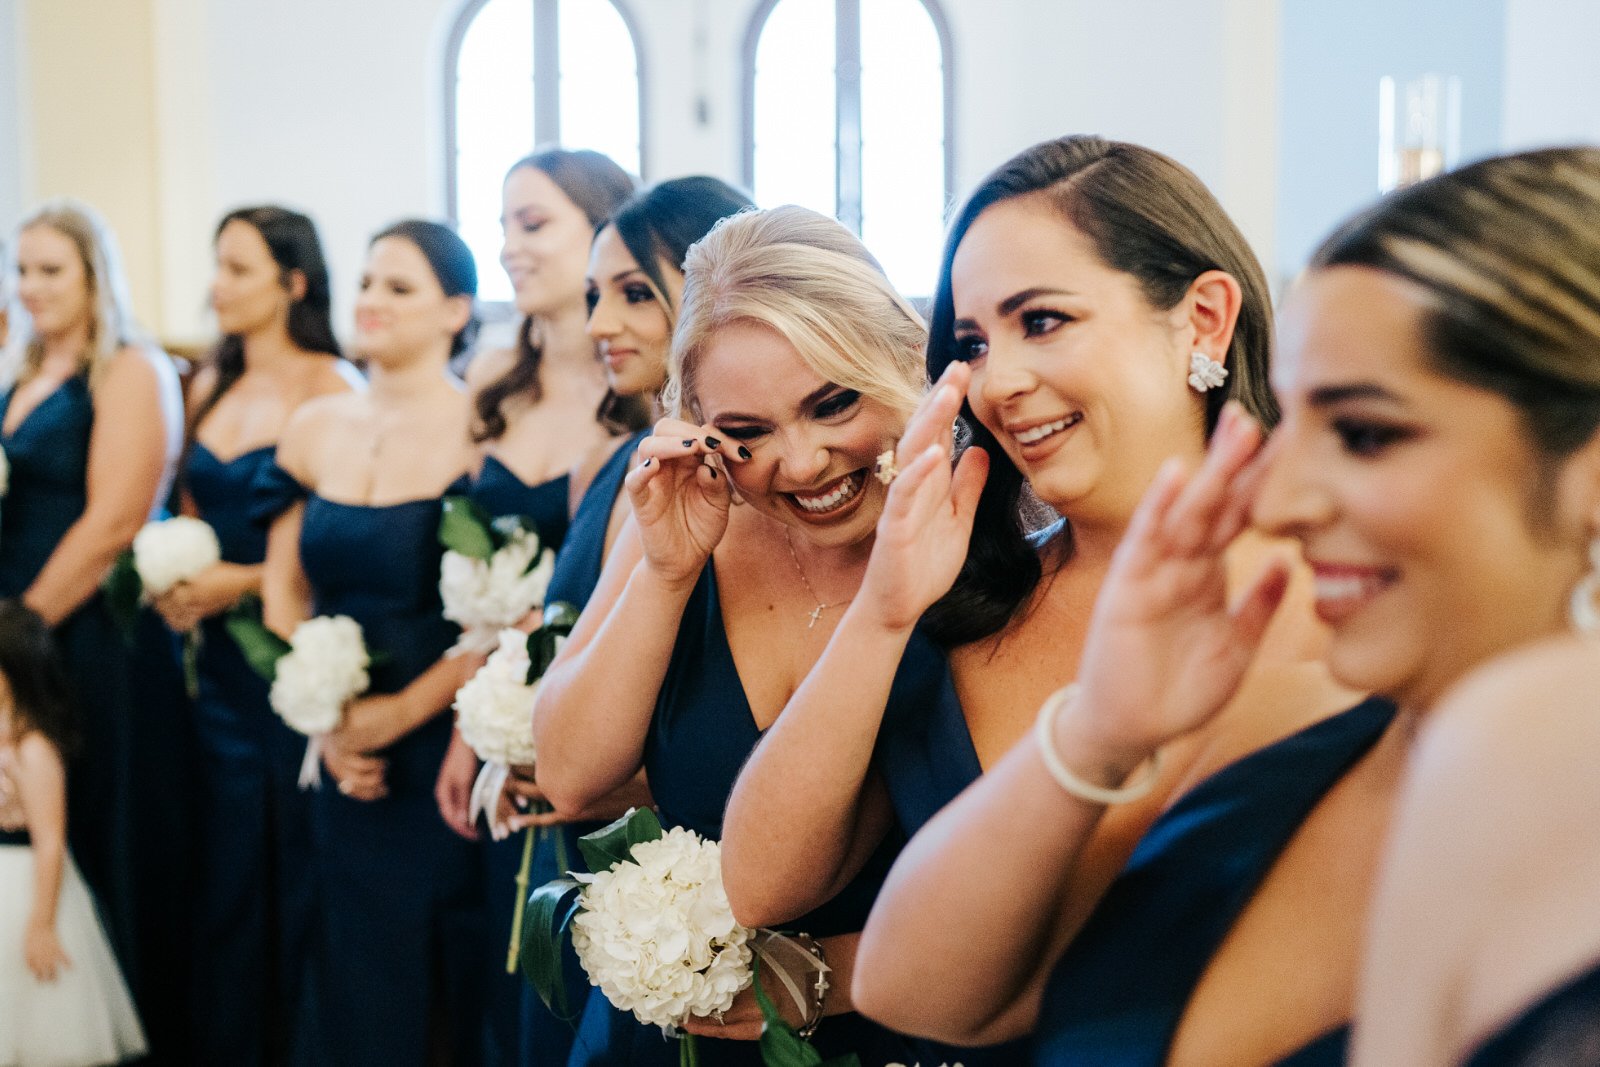 Eight bridesmaids wait at the top of the aisle of the church as bride walks down the aisle. Three of the bridesmaids wipe away tears of excitement